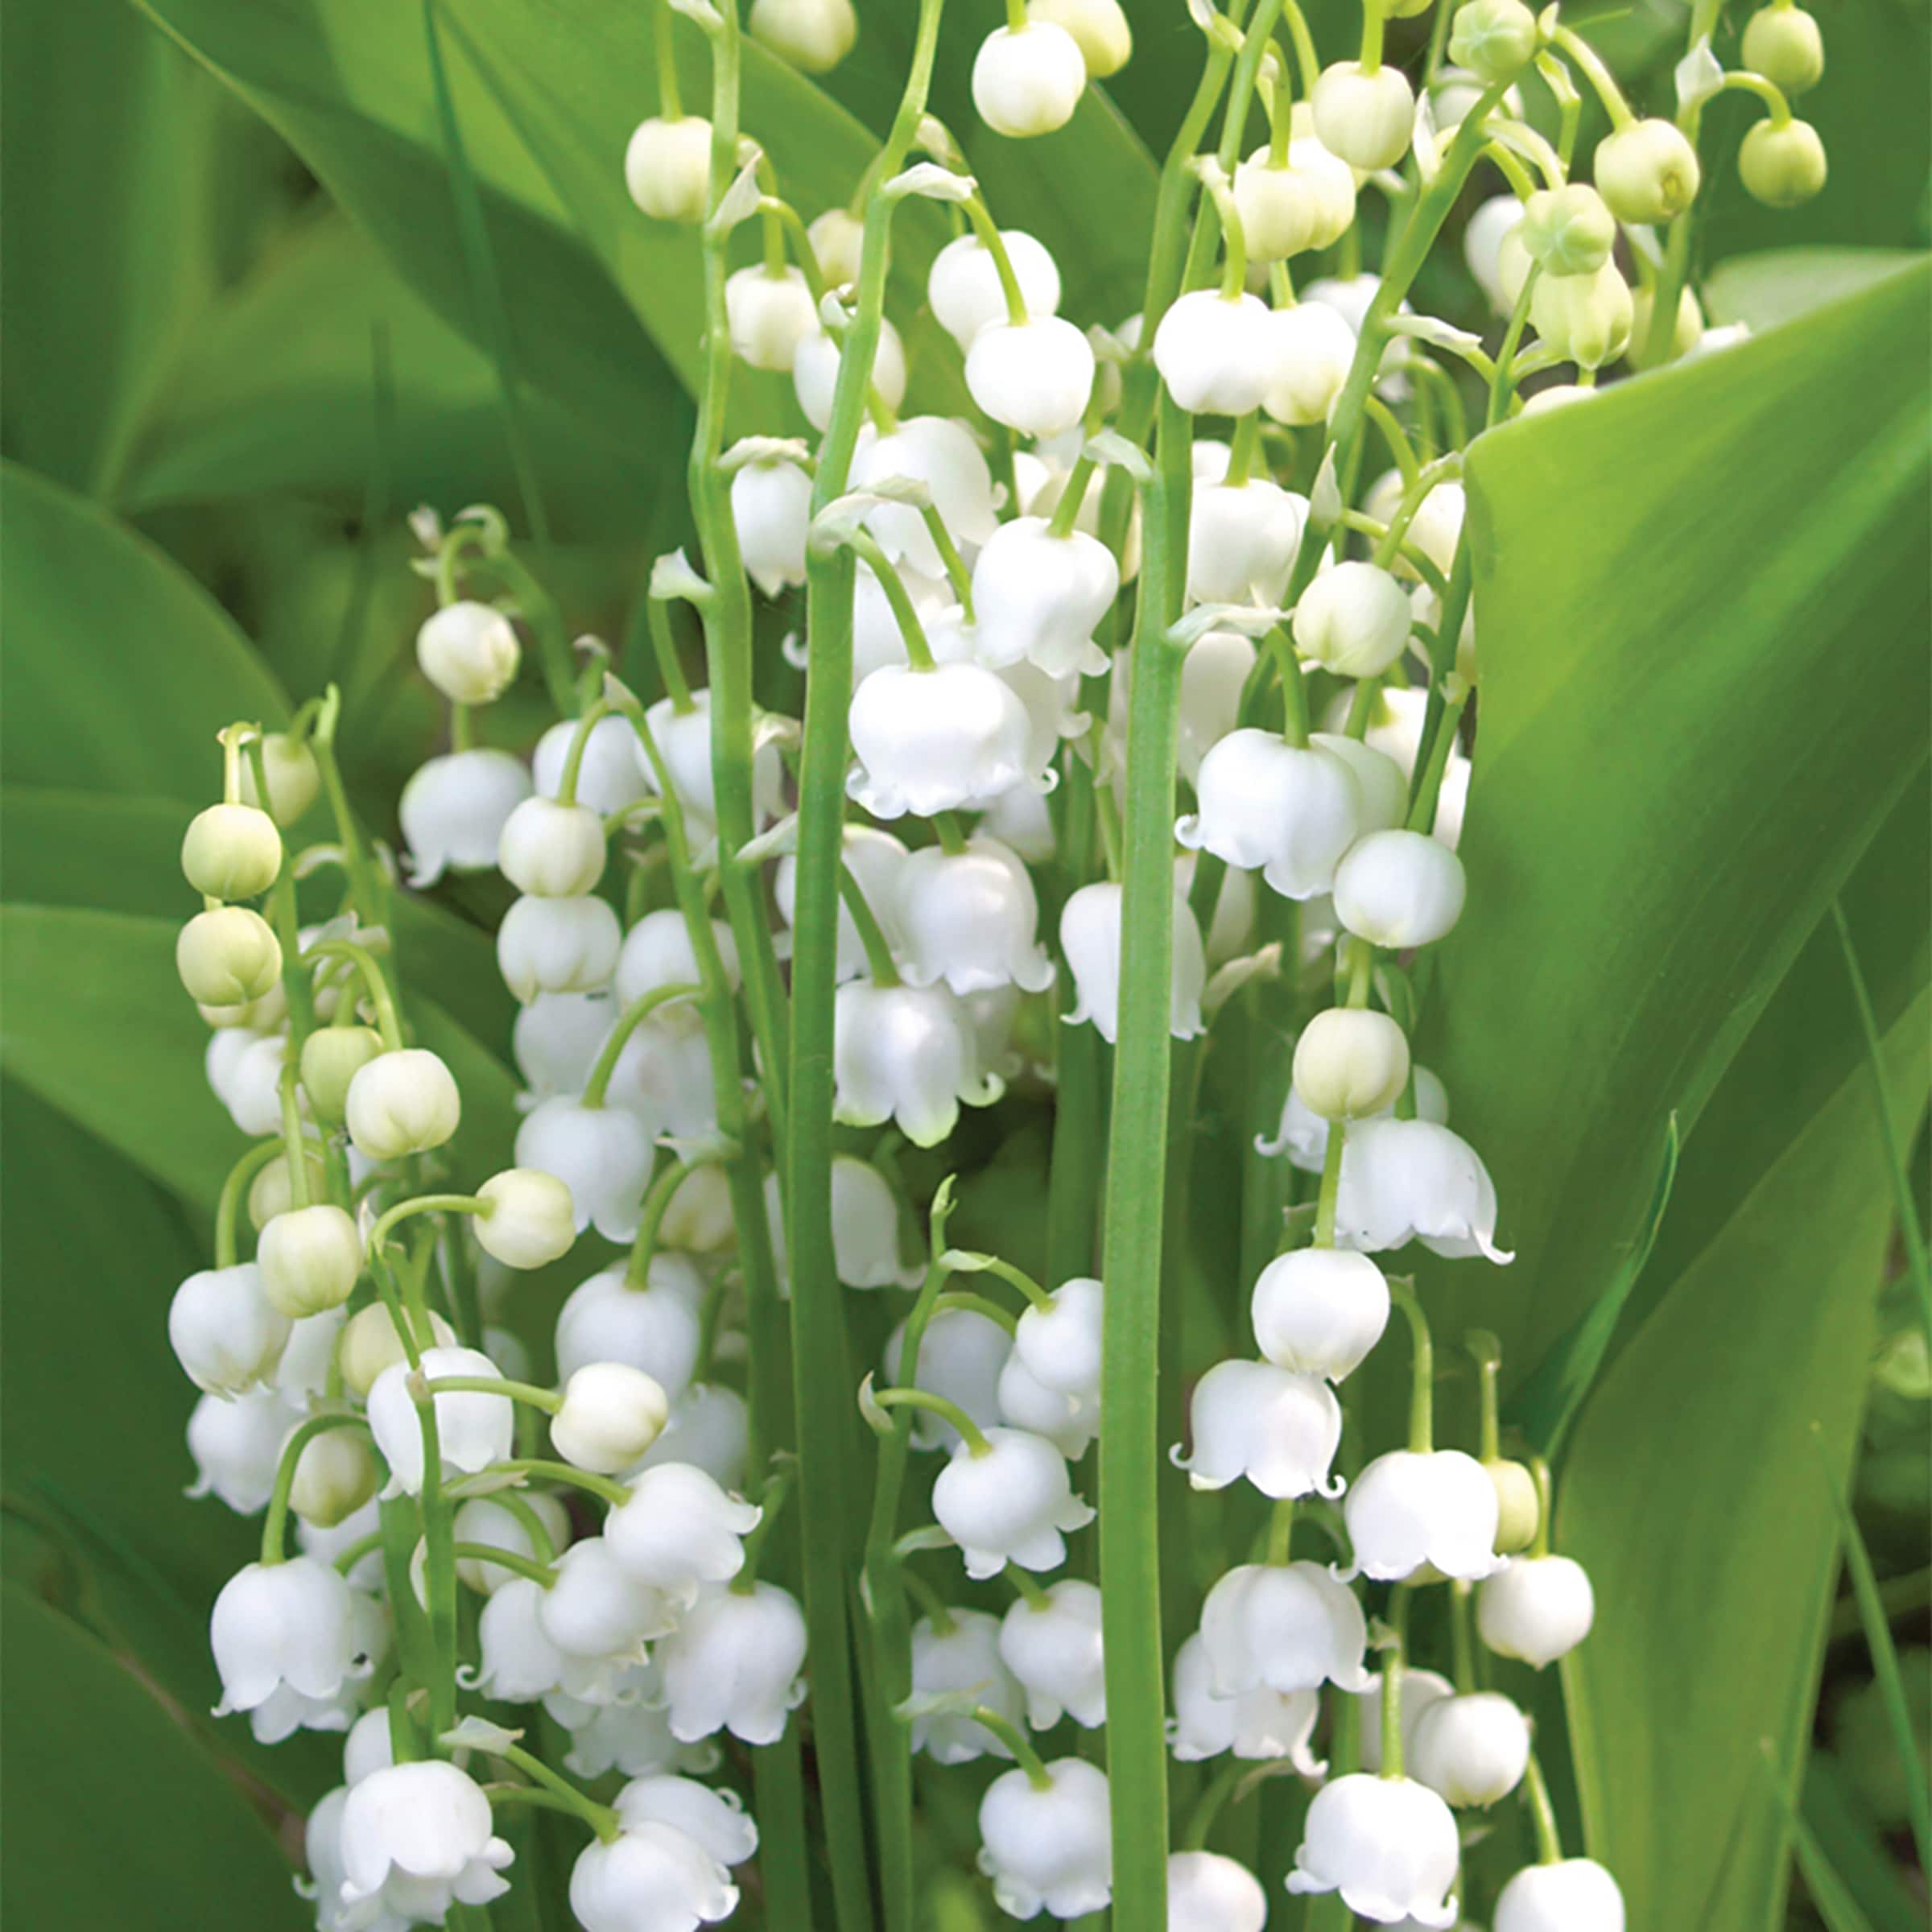 Van Zyverden White Lily Of The Valley Bulbs Bagged 10-Count in the